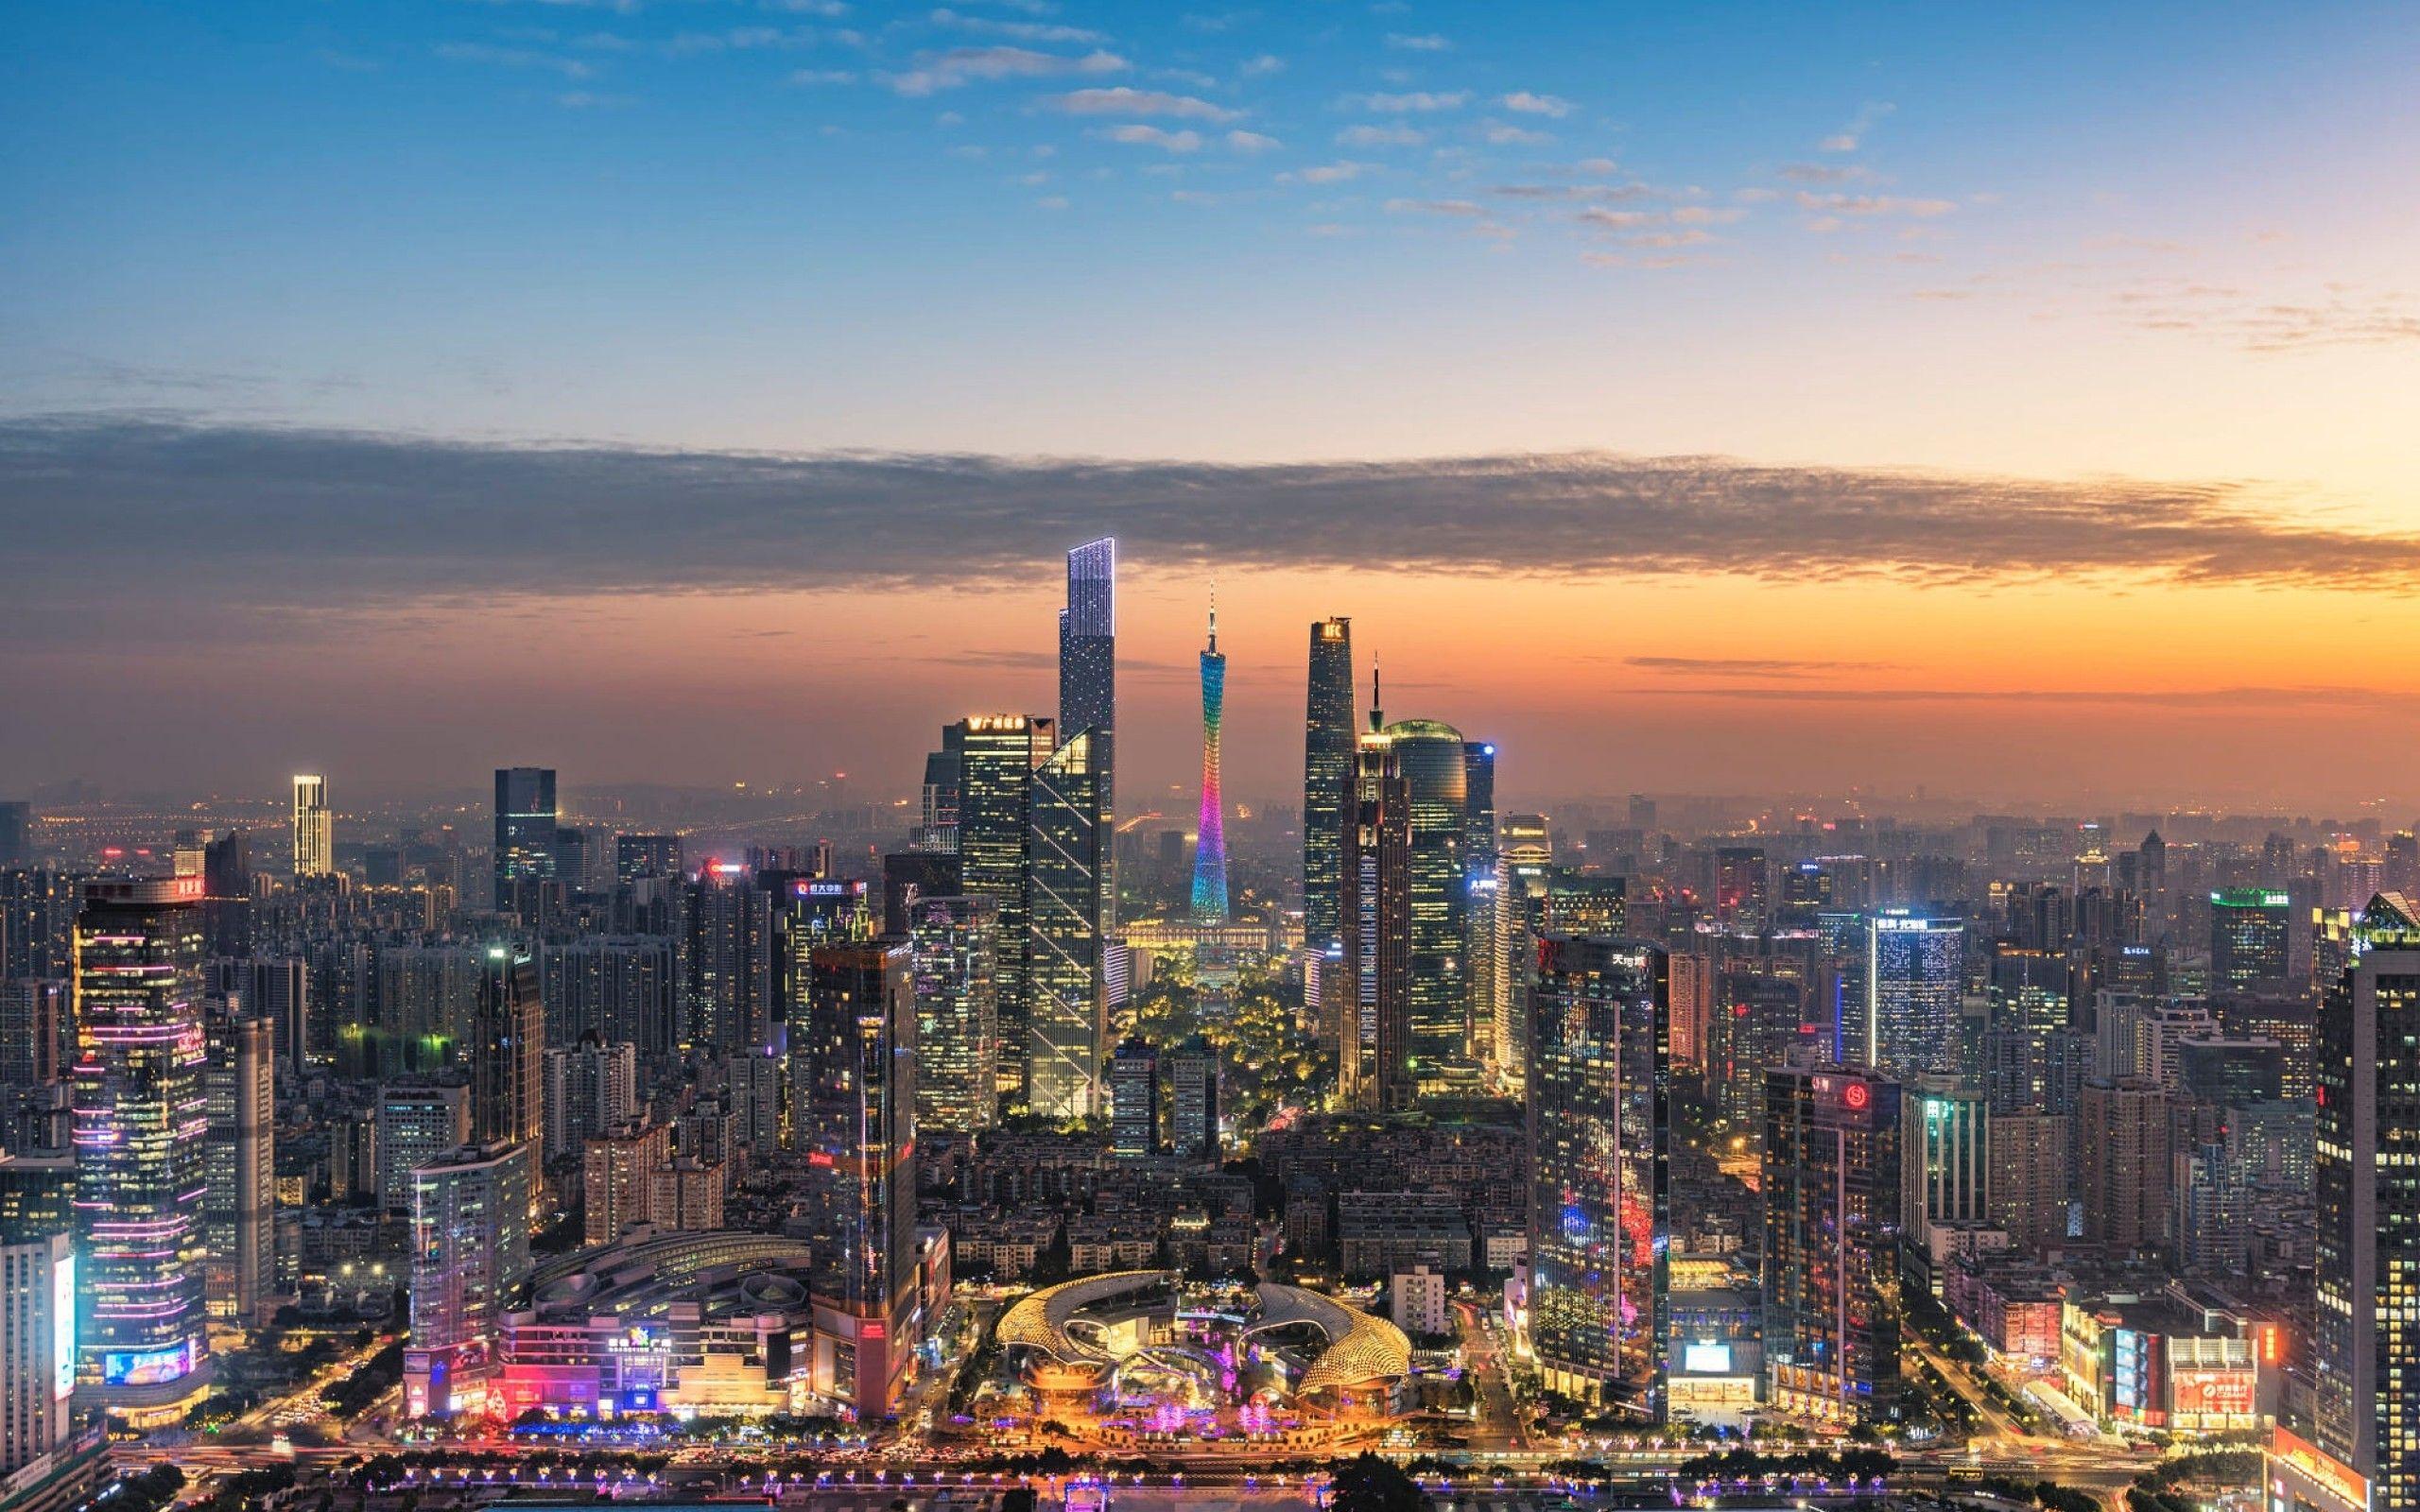 Download 2560x1600 China, Guangzhou, Cityscape, Skyscrapers, Sky